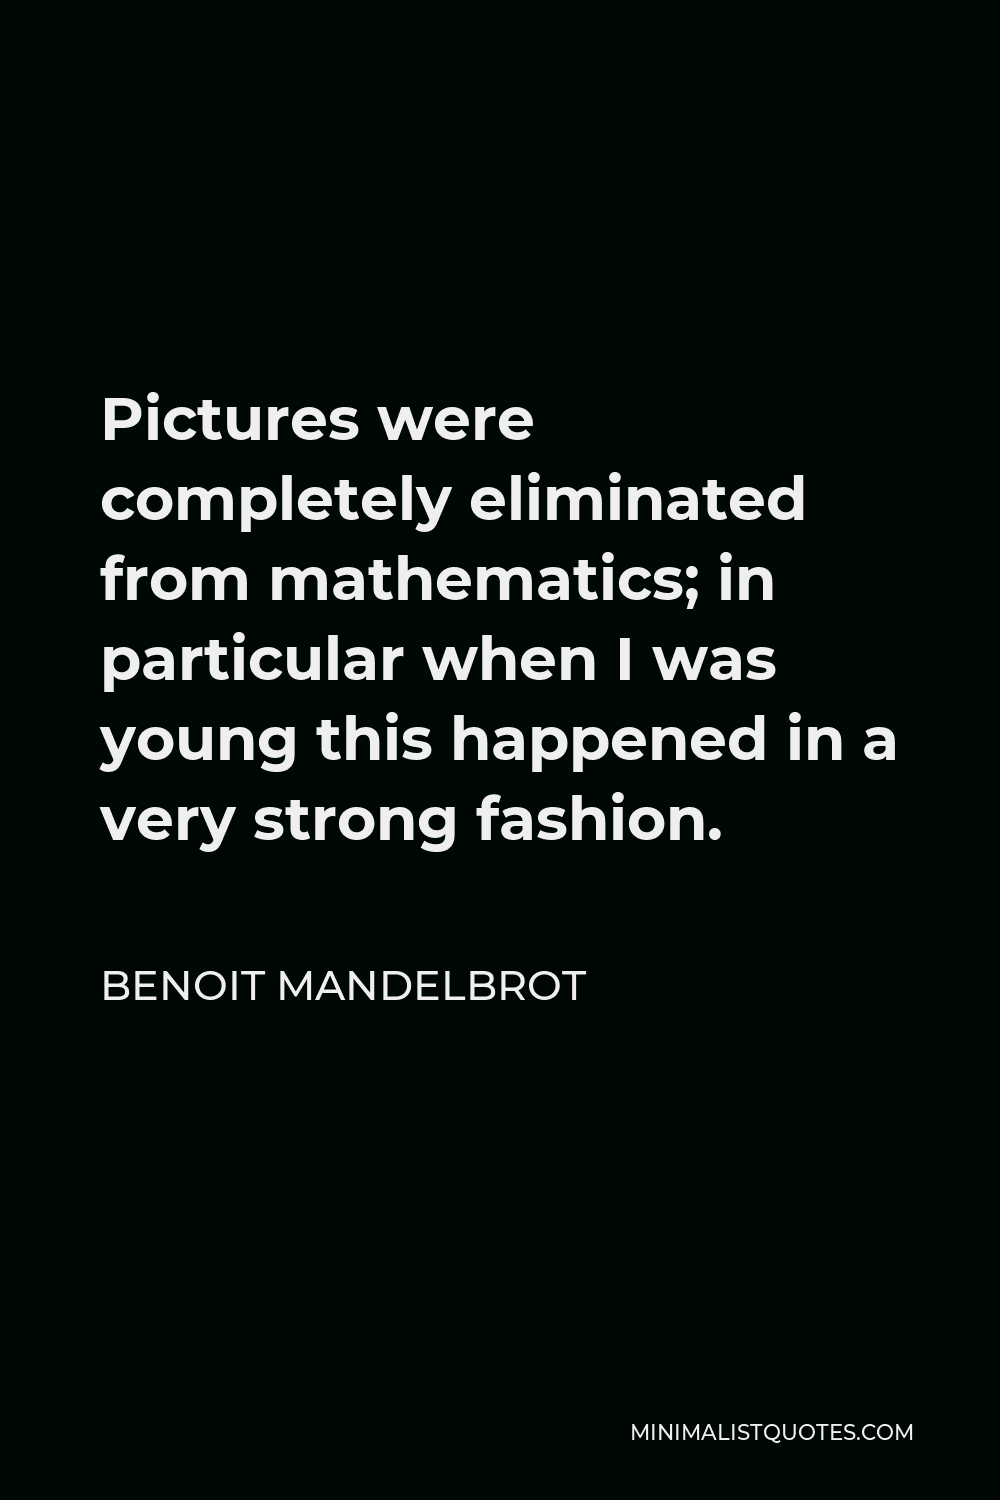 Benoit Mandelbrot Quote - Pictures were completely eliminated from mathematics; in particular when I was young this happened in a very strong fashion.